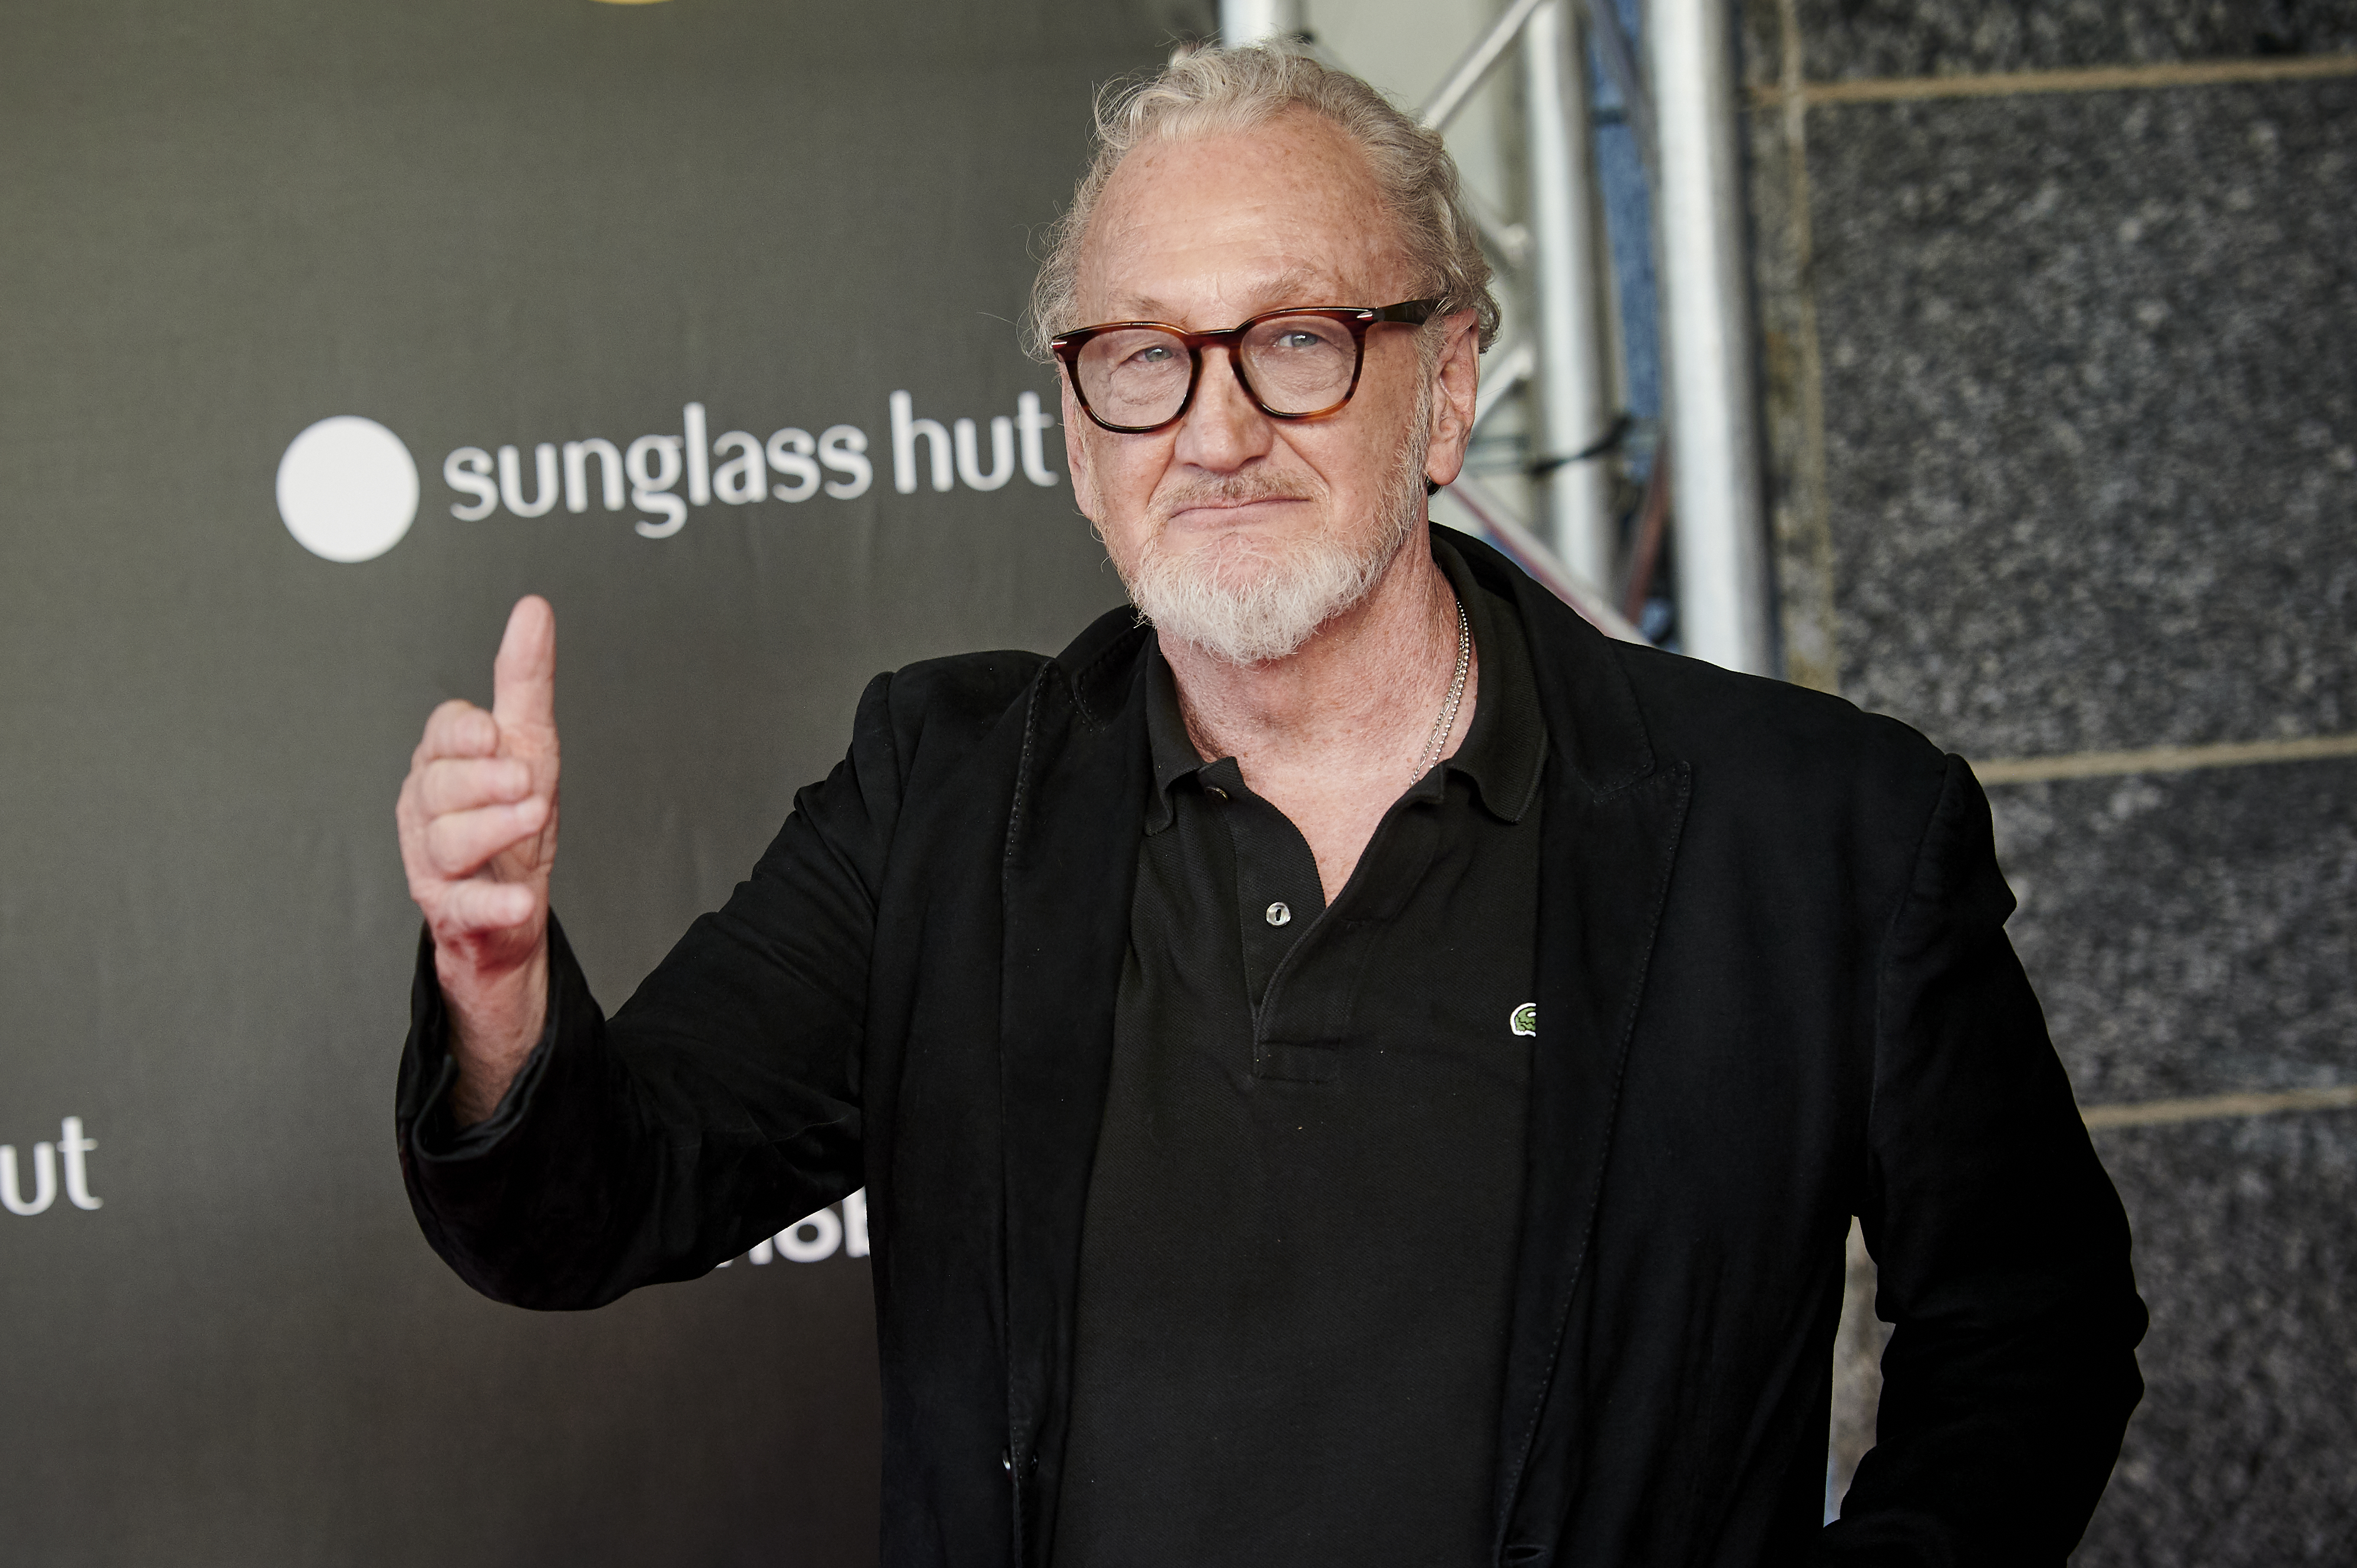 Robert Englund on Day 1 of Sitges Film Festival 2022 on October 6, 2022, in Sitges, Spain. | Source: Getty Images